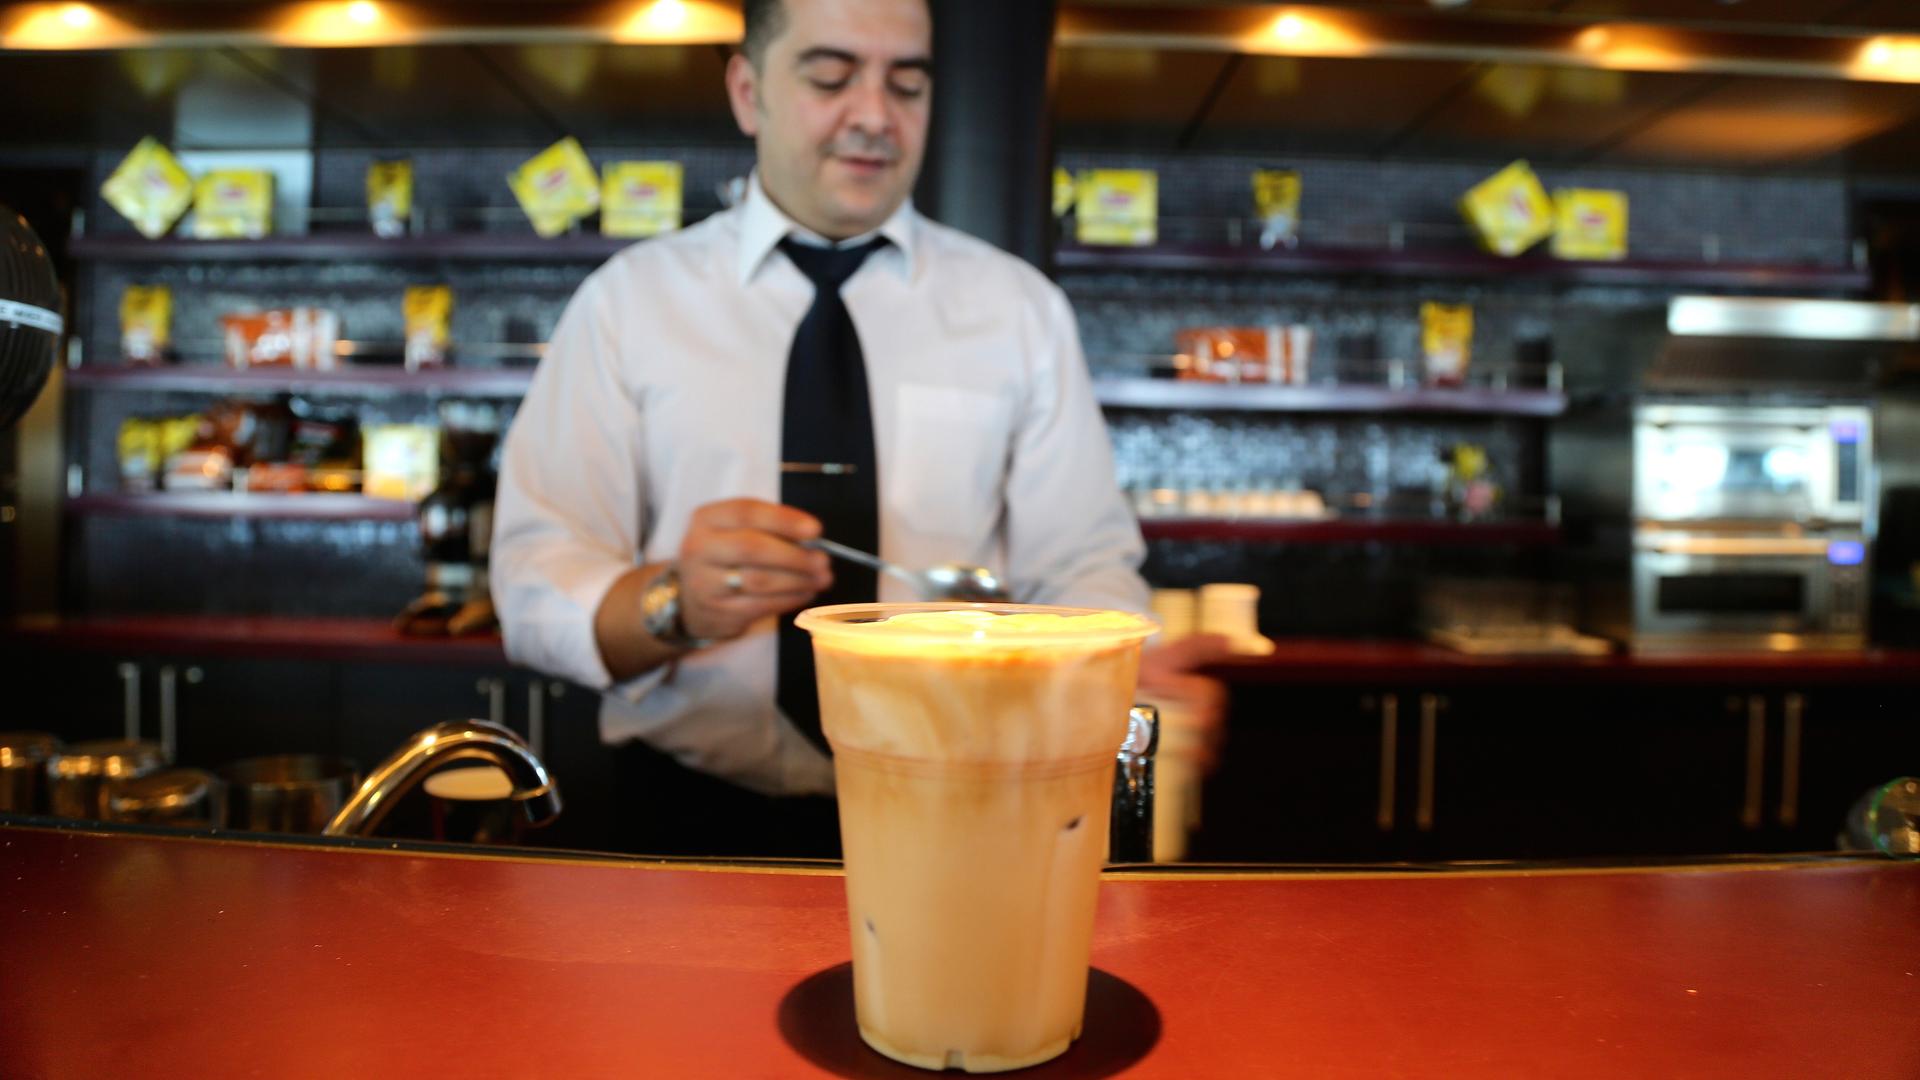 George makes about a hundred frappuccinos a day for the guests on board a Greek ferry docked in Tobruk, Libya.